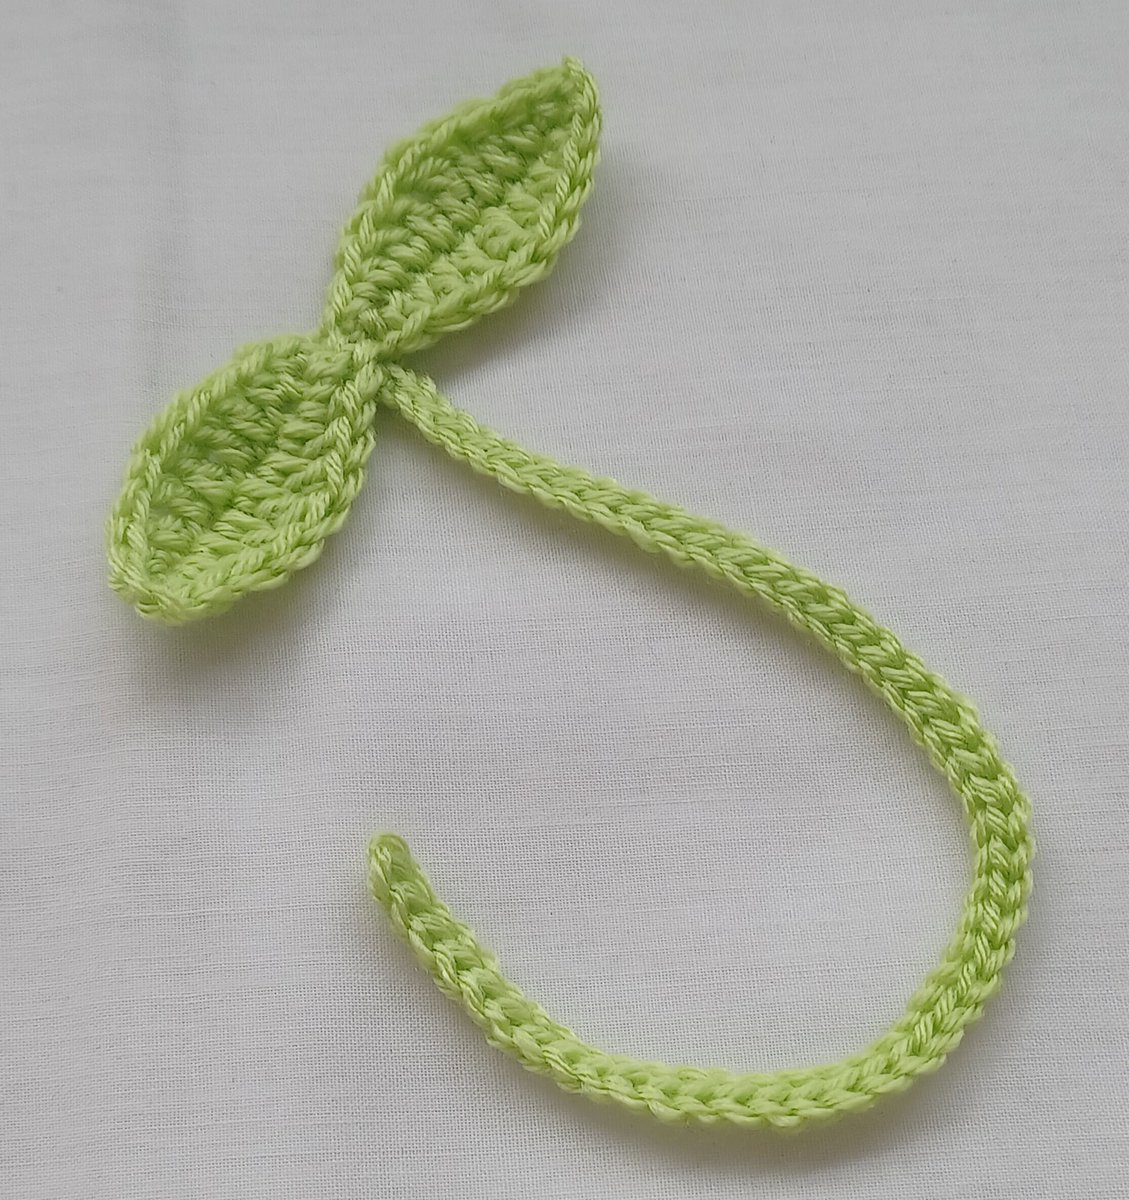 Excited to share the latest addition to my #etsy shop: Crochet Leaf Bookmark etsy.me/3CcjBpc #crochet #leaves #bookmark #crochetbookmark #crochetleaves #bookaccessories #bookishgifts #readersgifts #handmade